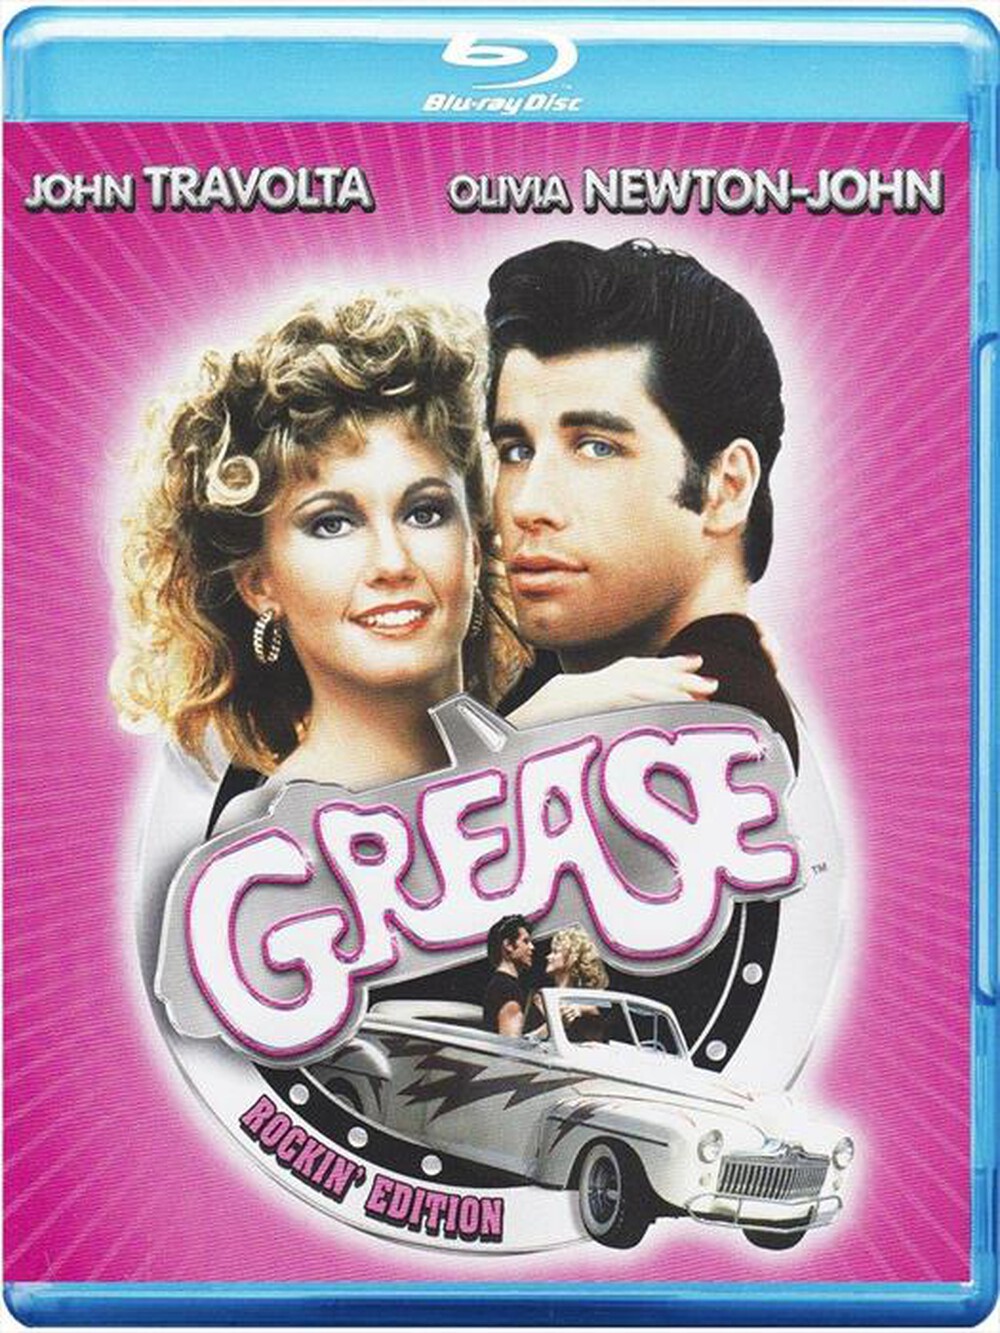 "UNIVERSAL PICTURES - Grease (SE)"